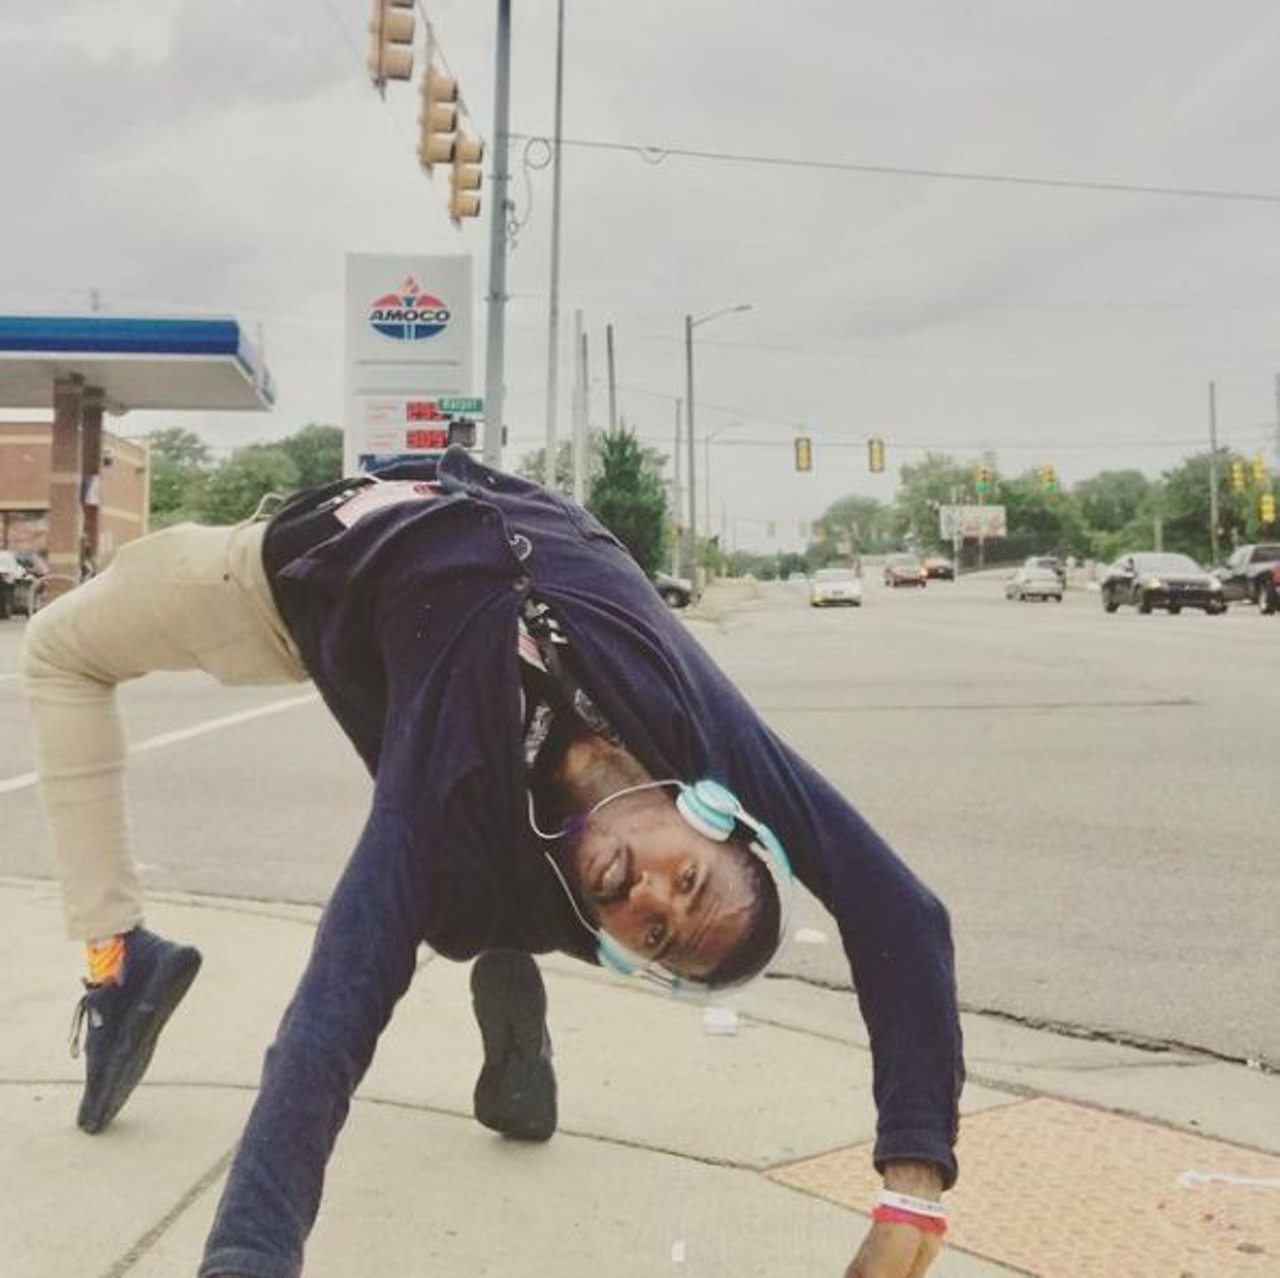 Detroit Chris Brown
If you’ve ever driven past Harper and Cadieux or Moross and Kelly, you’ve likely seen Darius Jones dancing on the corner. Affectionately known as Detroit Chris Brown, Jones has danced on the east side street corners for years, even receiving a Spirit of Detroit award in 2017. In 2019, there was a community uproar after Jones was nearly arrested after a run-in with Detroit Police. Nonetheless, he’s still going strong and putting smiles on people’s faces with his moves and silly costumes often. 